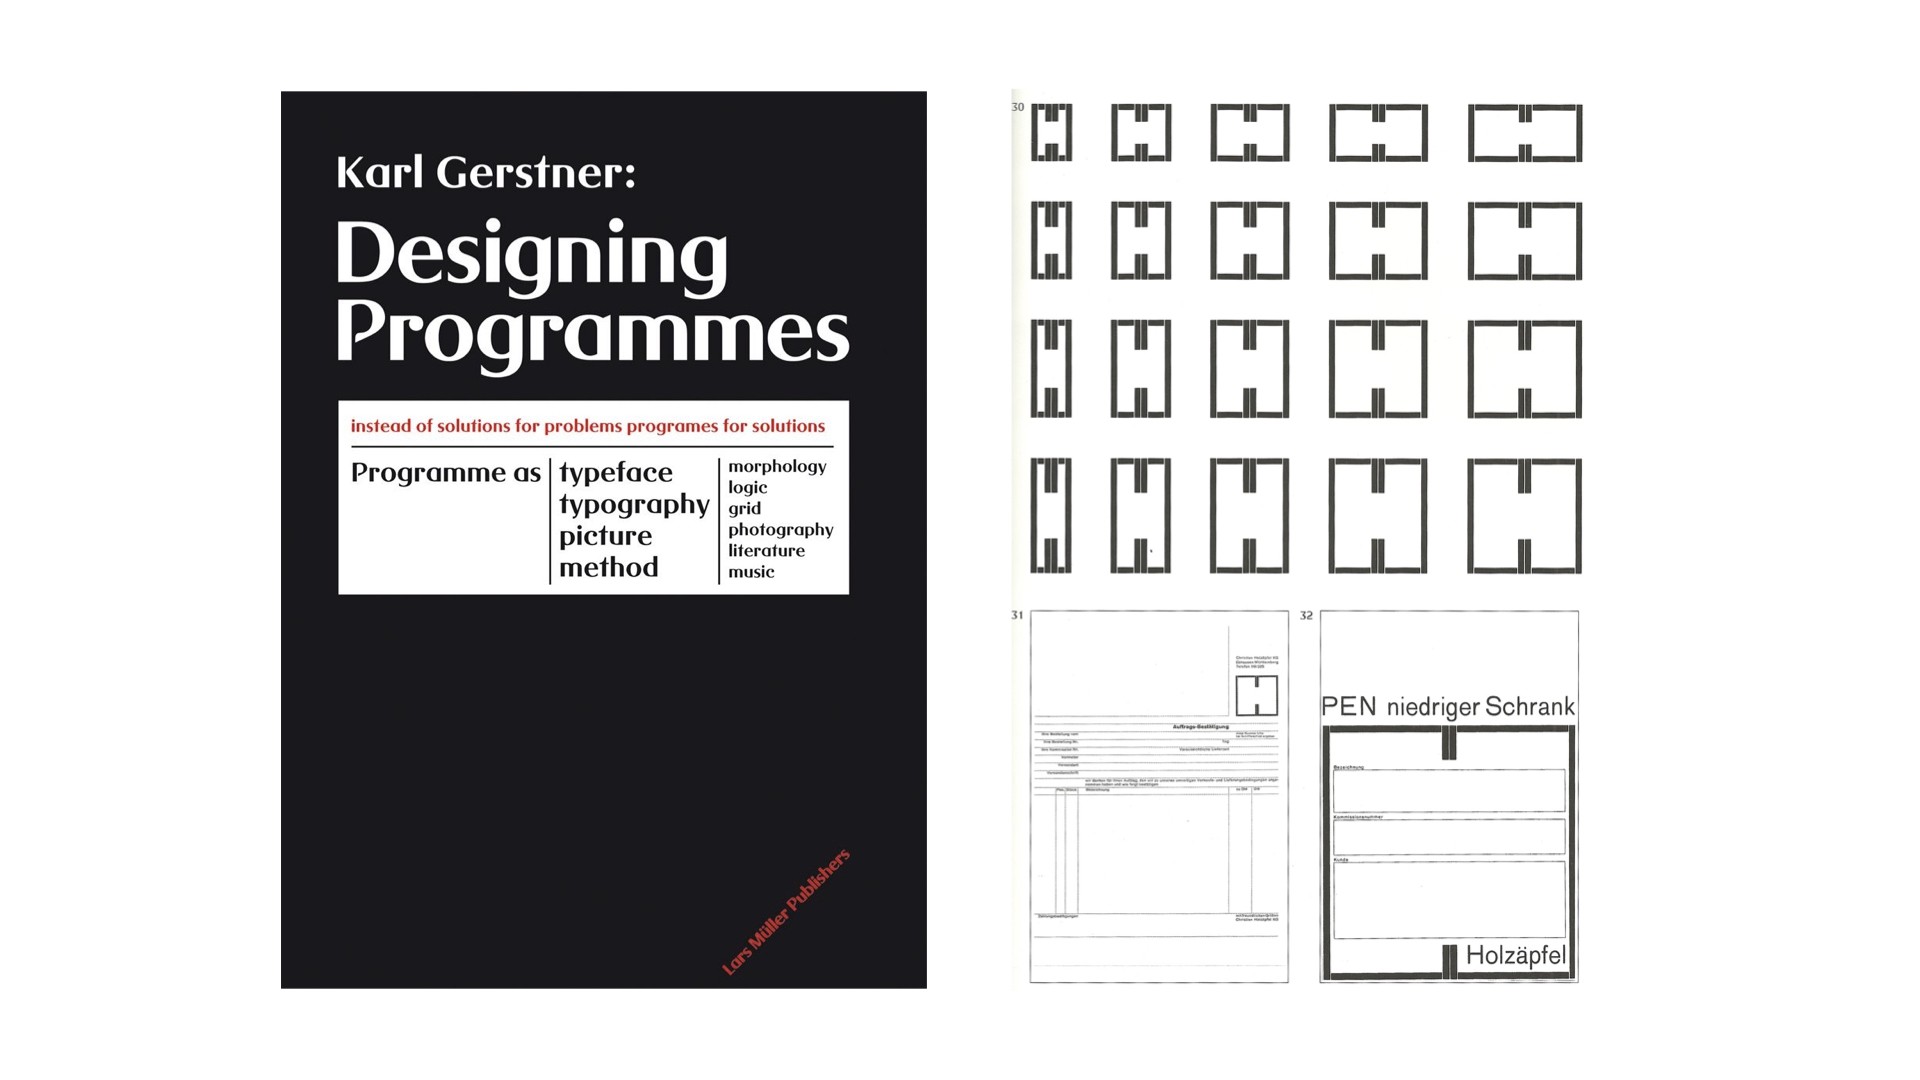 Two other examples of graphic design rule books.